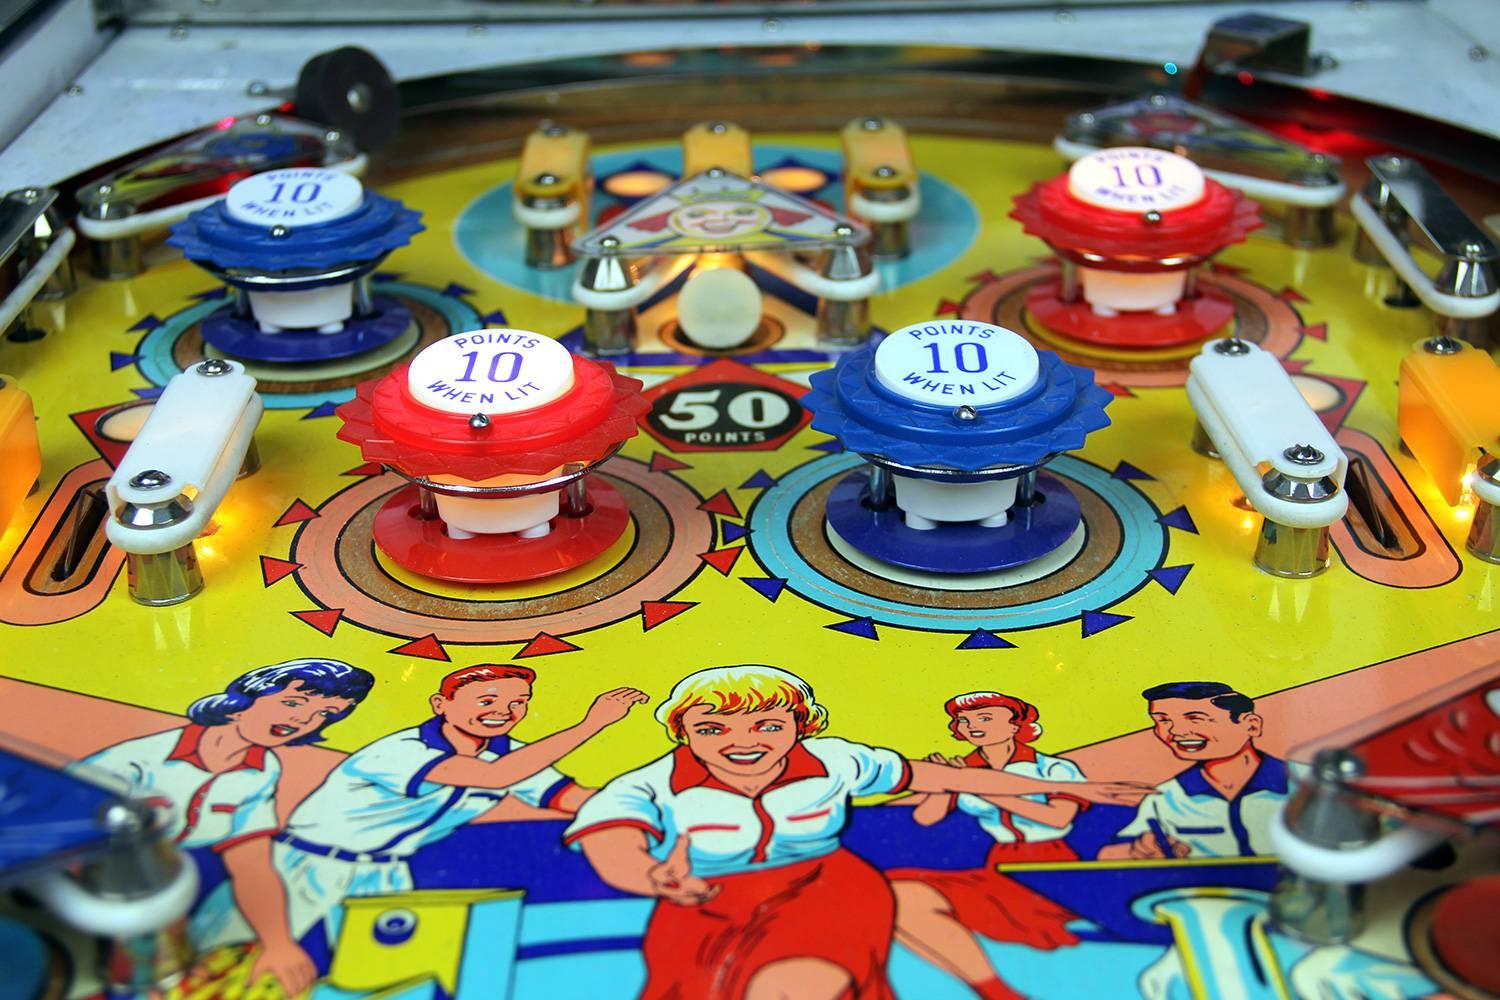 North American Gottlieb Bowling Queen, Vintage Pinball Machine 1964, Fully Restored For Sale